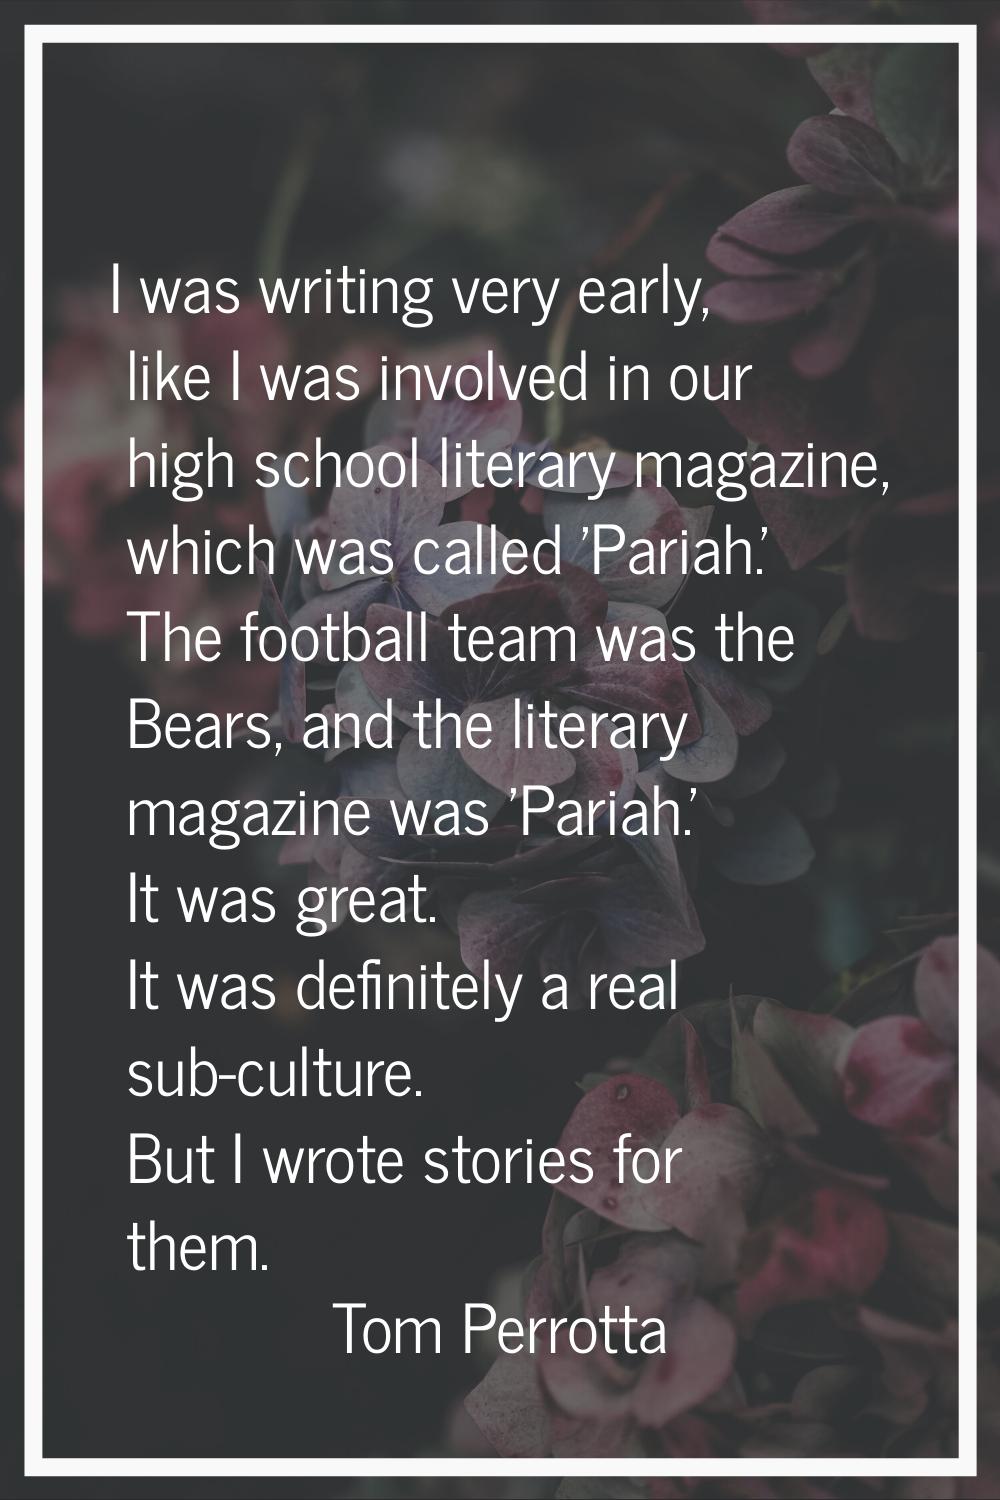 I was writing very early, like I was involved in our high school literary magazine, which was calle